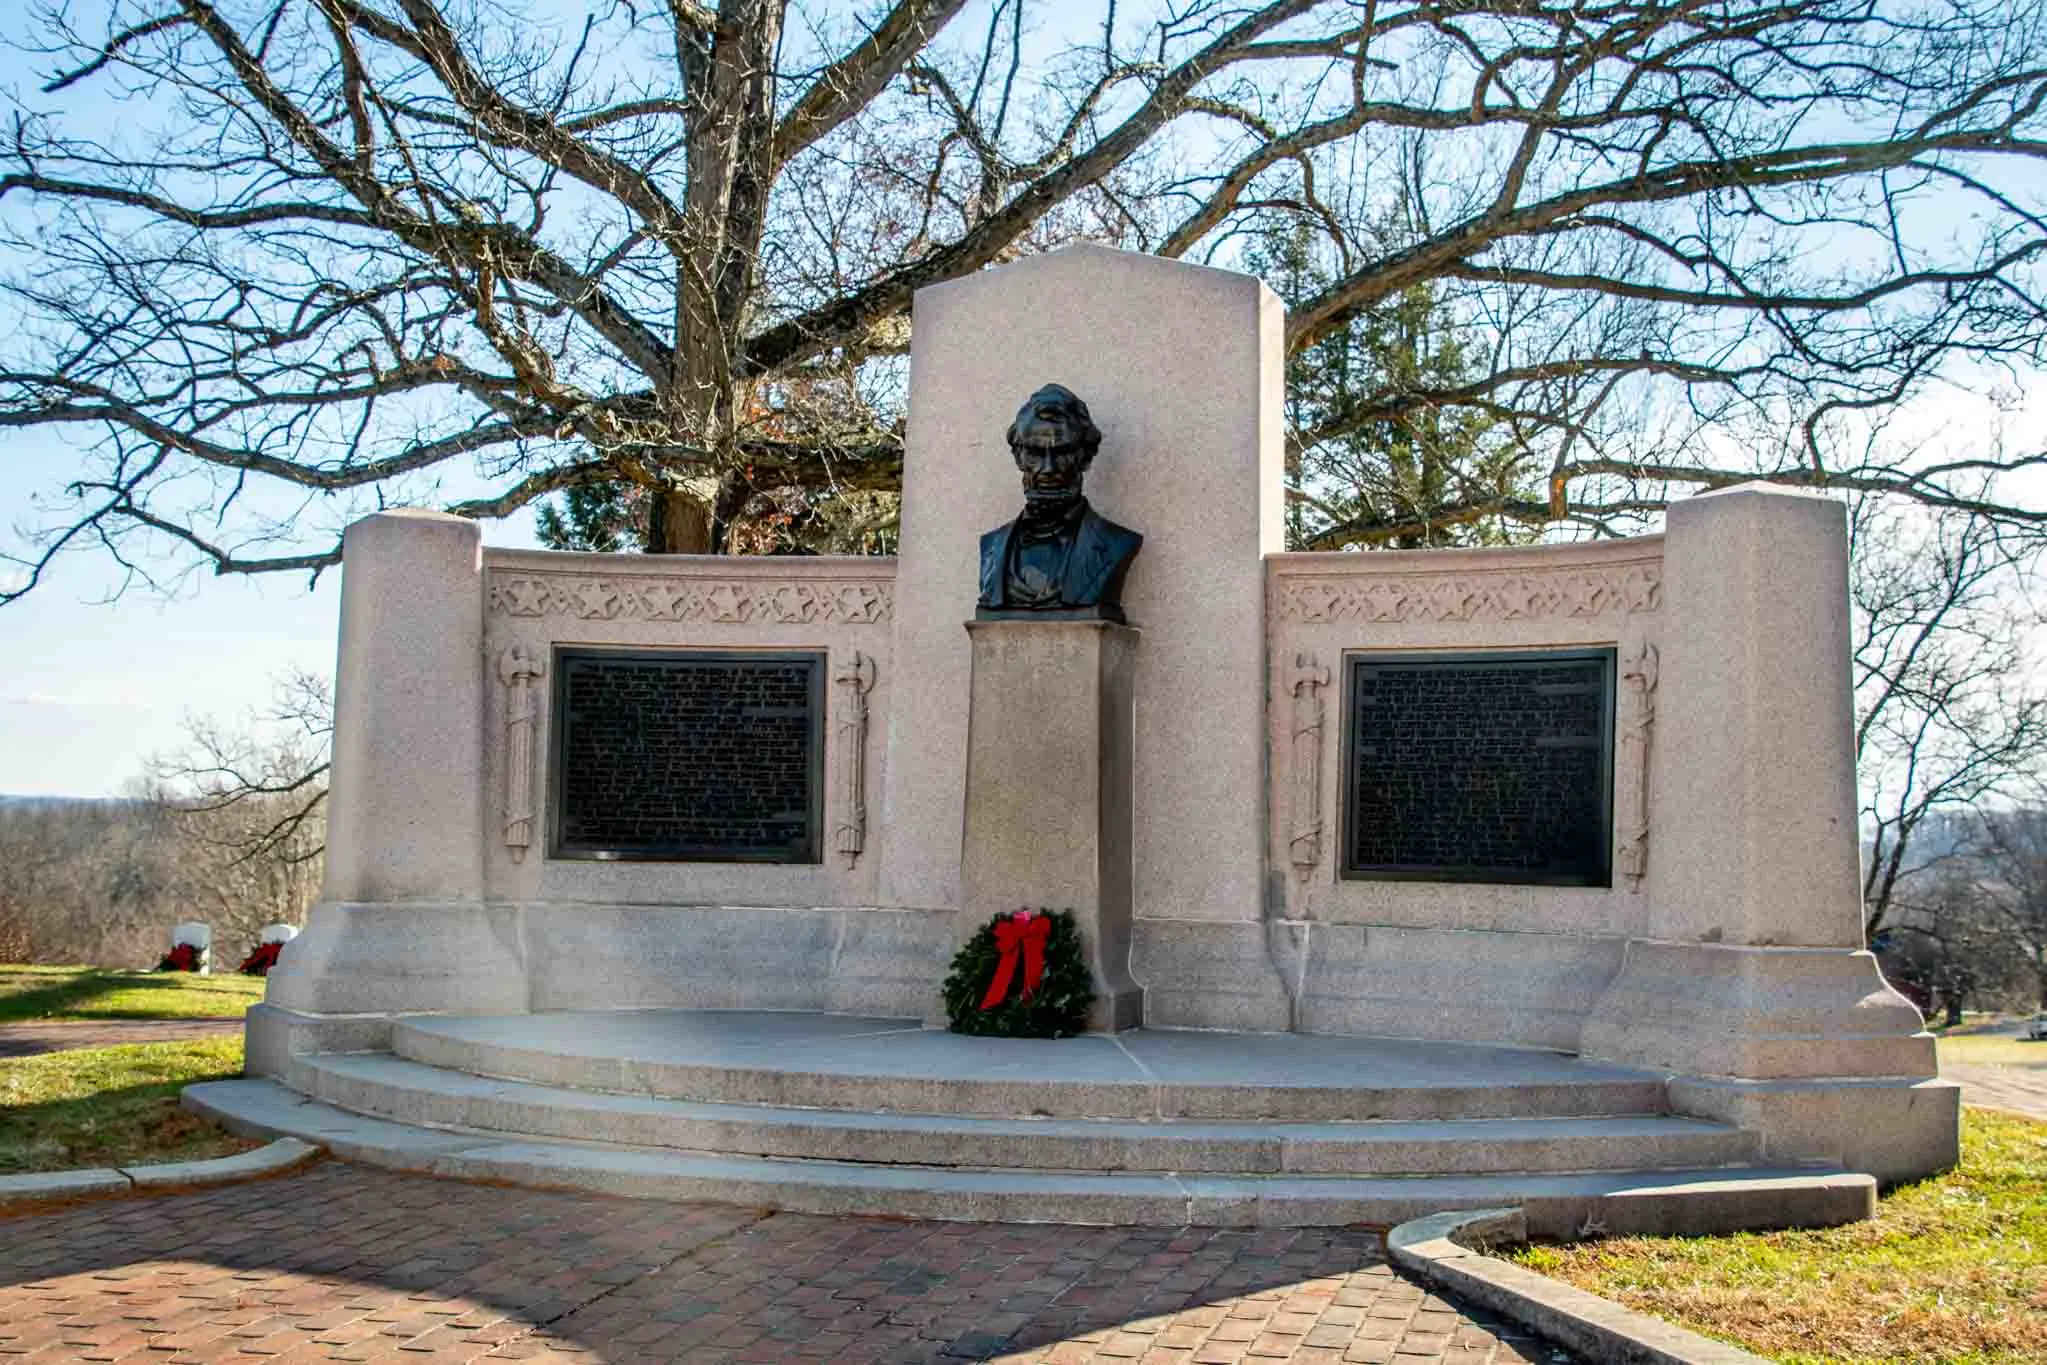 Stone memorial with bust of Abraham Lincoln at site of the Gettysburg Address 